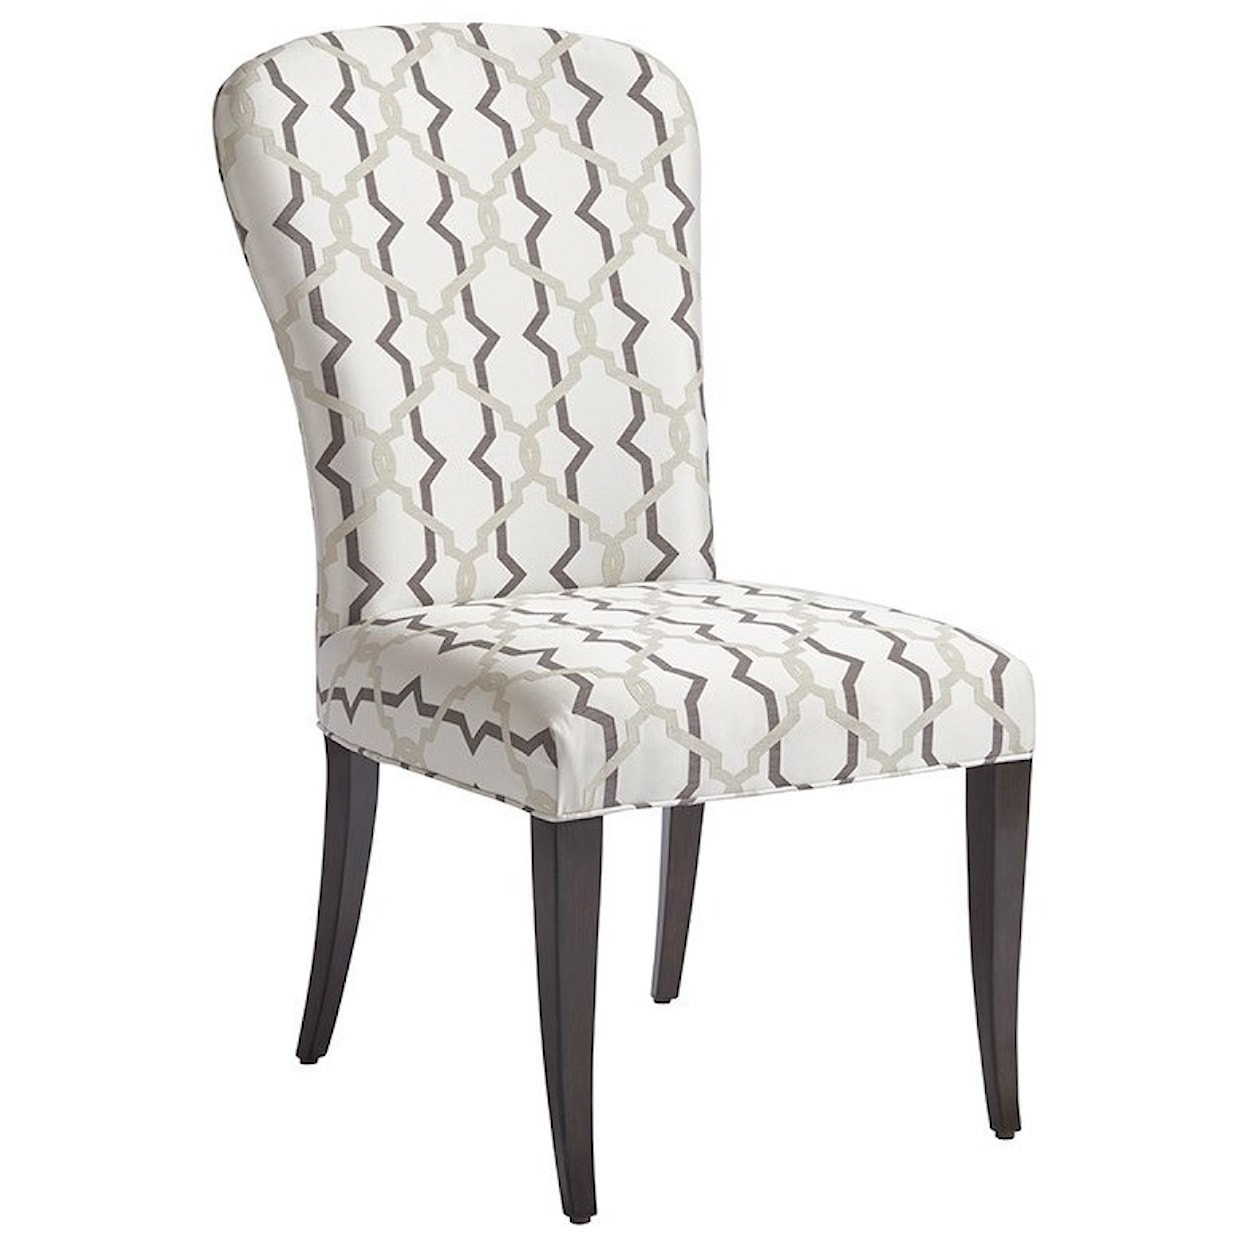 Barclay Butera Brentwood Schuler Upholstered Side Chair (custom)